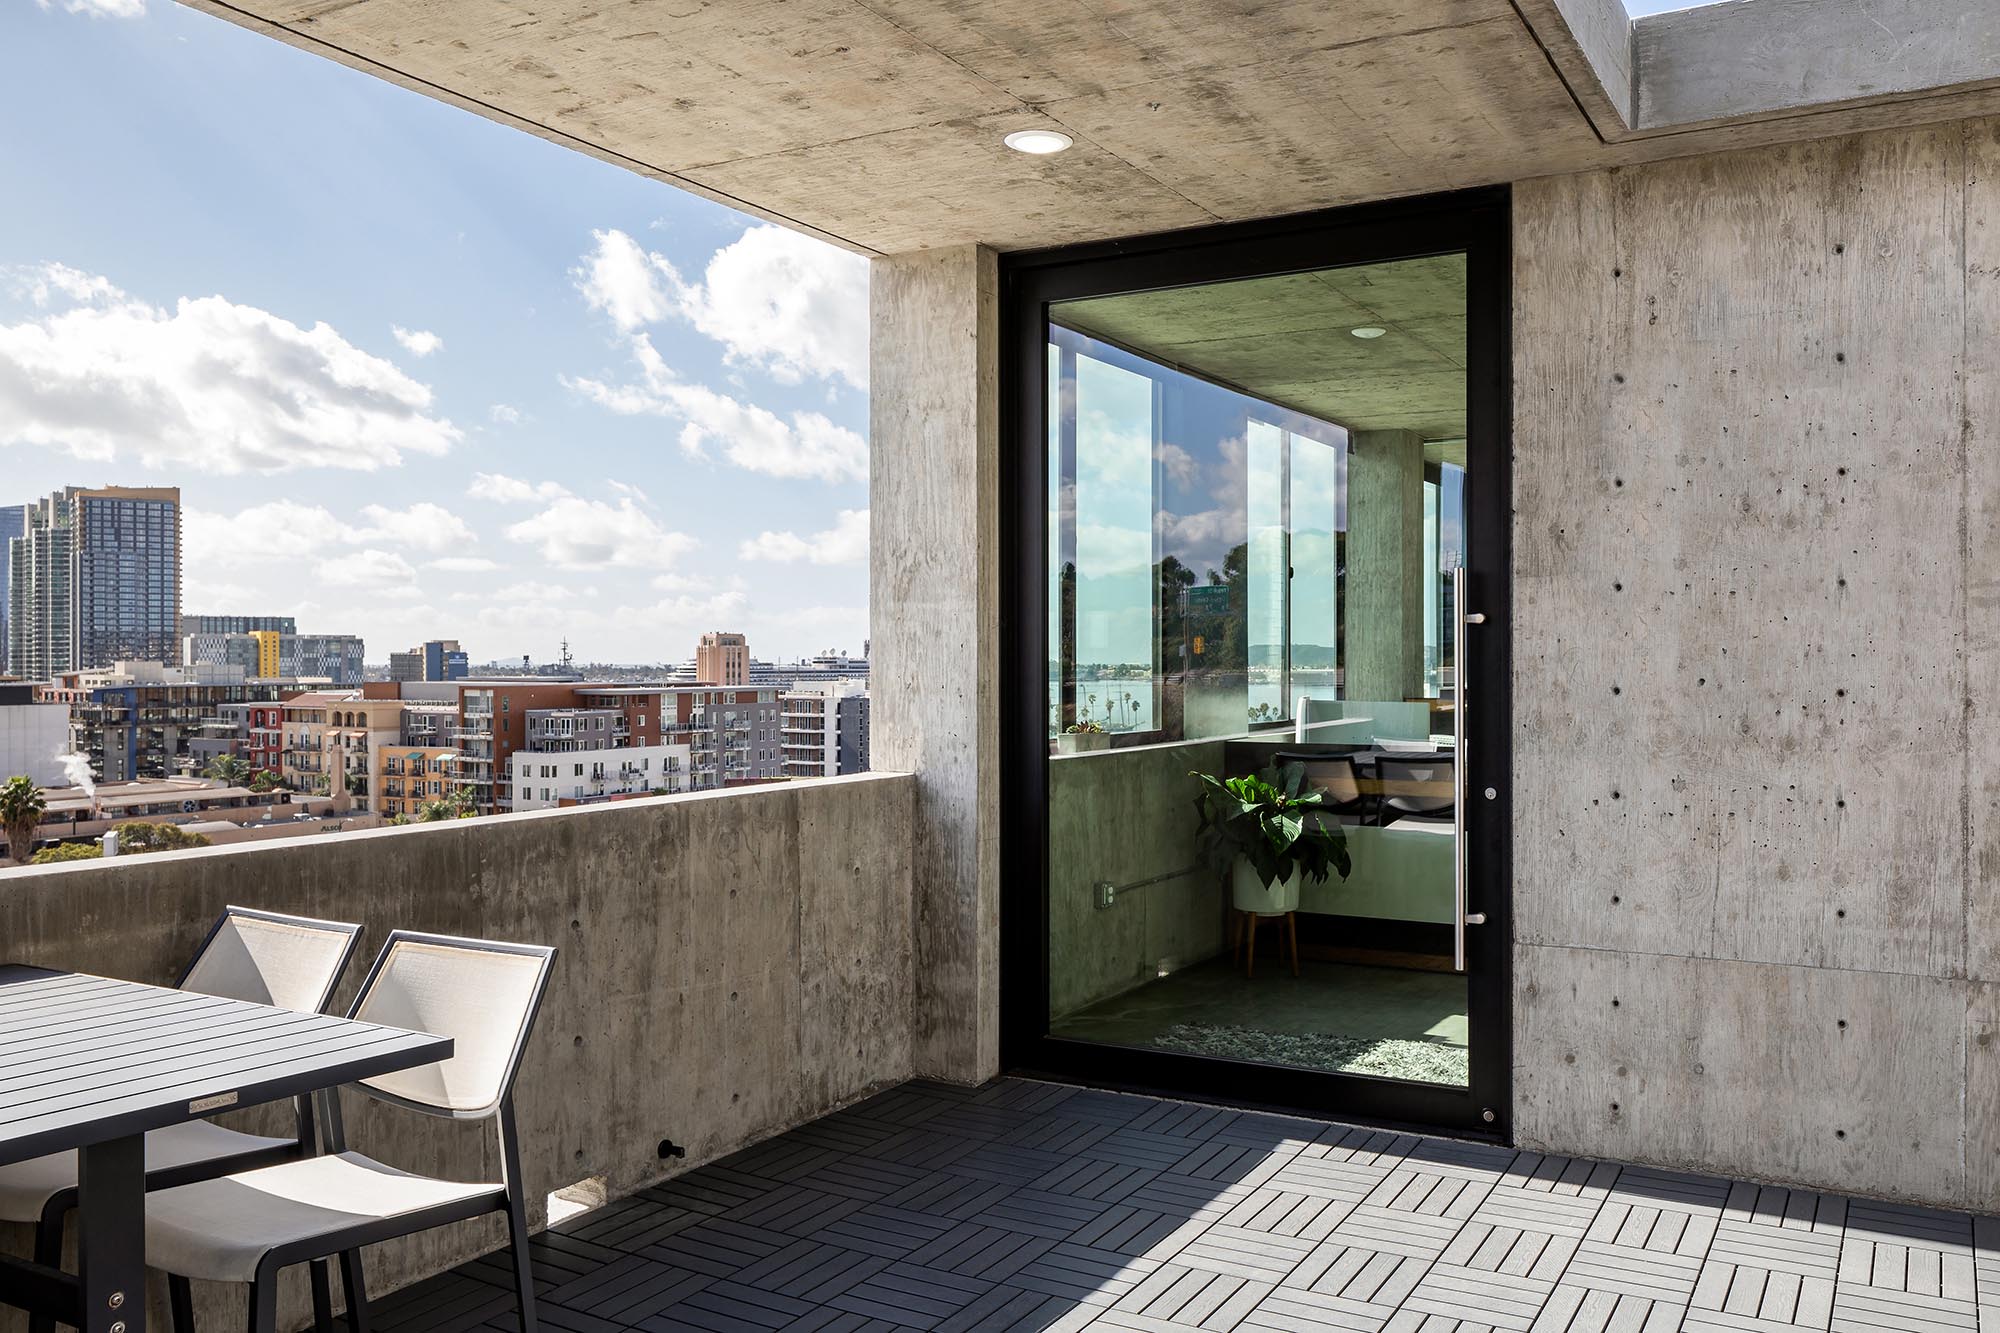 A covered balcony connects to this home’s interior through a large pivot door.